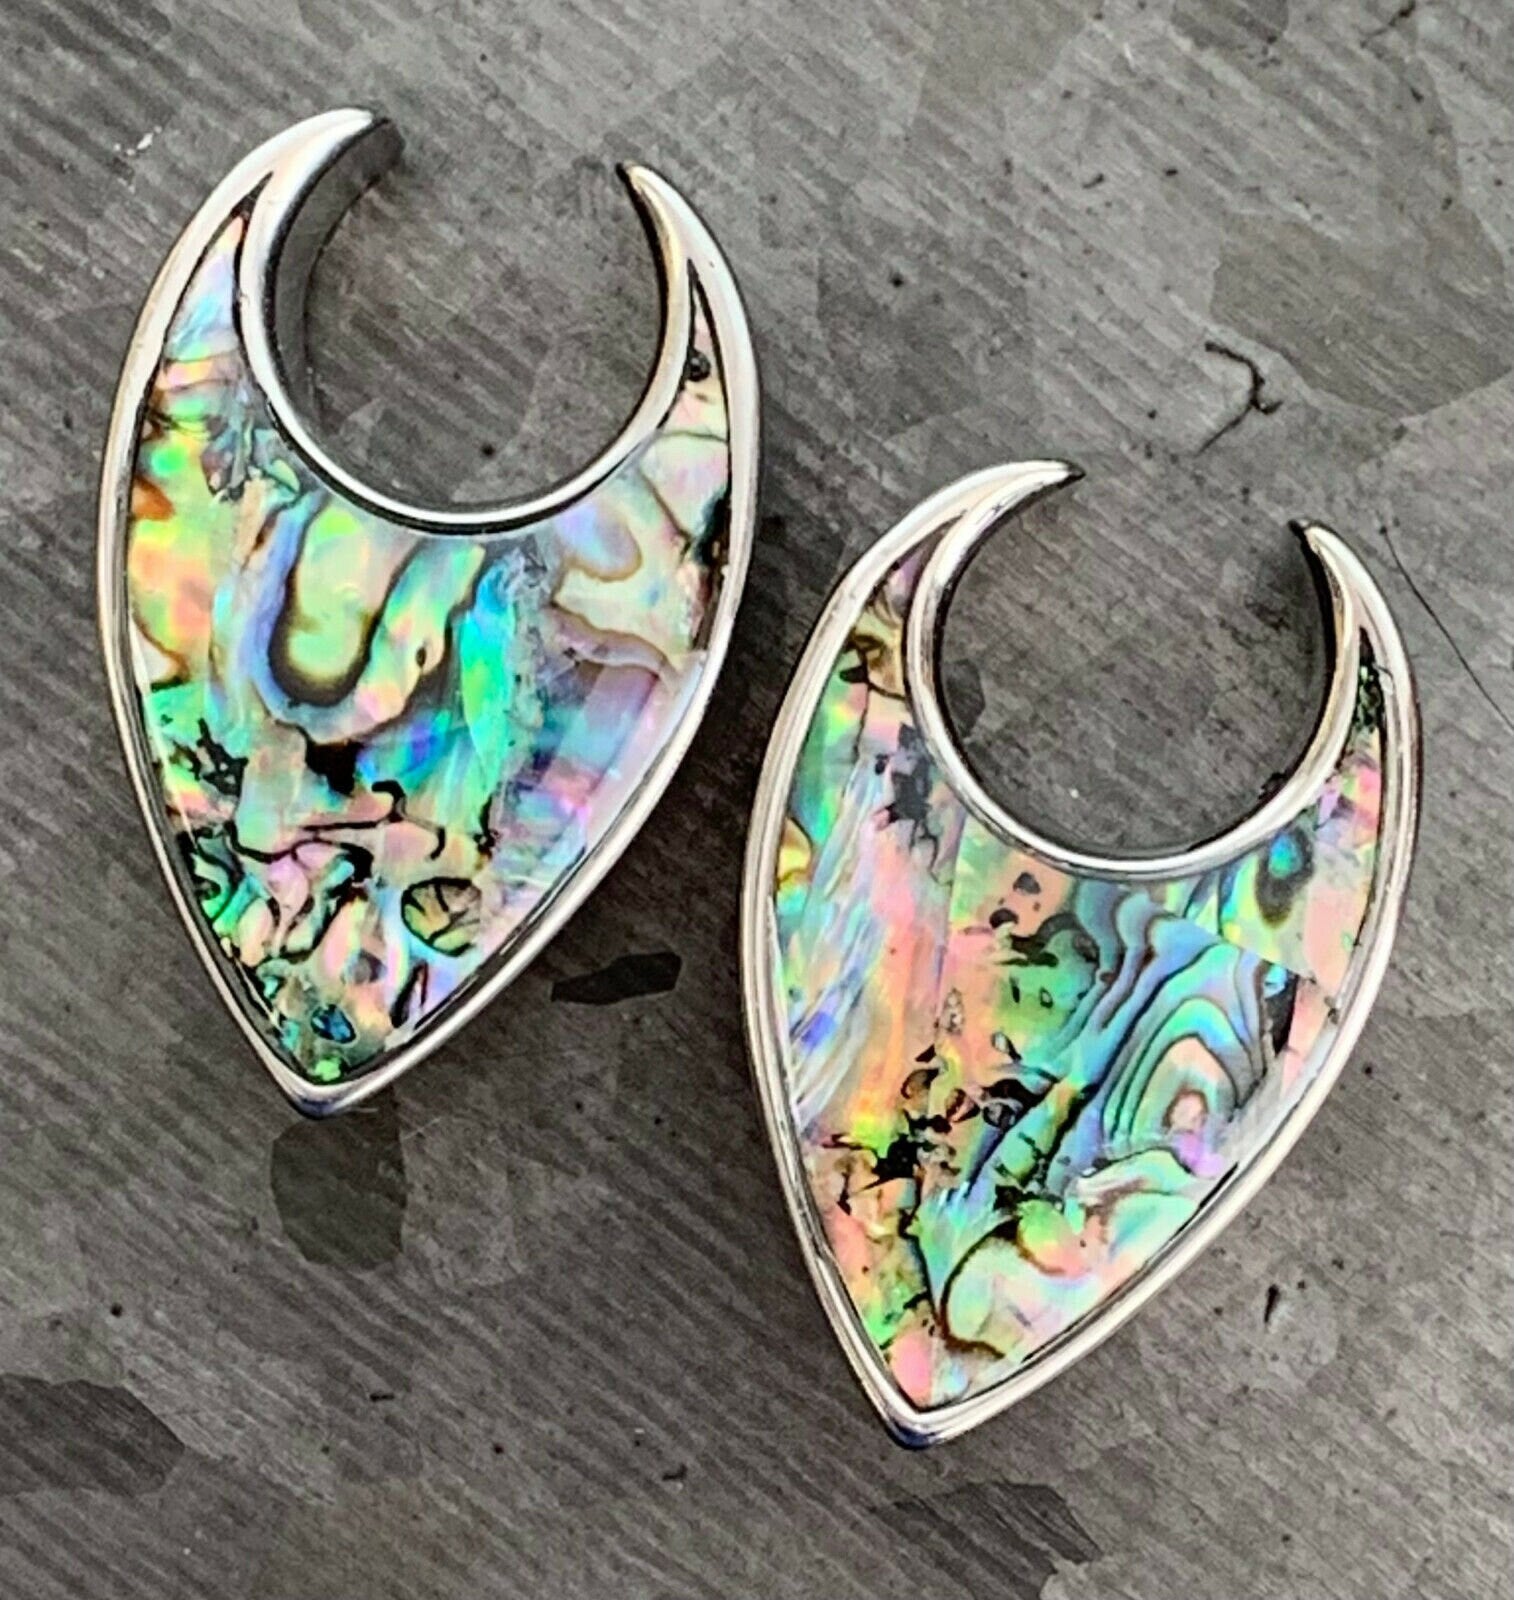 PAIR of Stunning Abalone Tear Drop Surgical Steel Saddle Ear Spreader Tunnels/Plugs/Hangers - Gauges 0g (8mm) thru 5/8" (16mm) available!